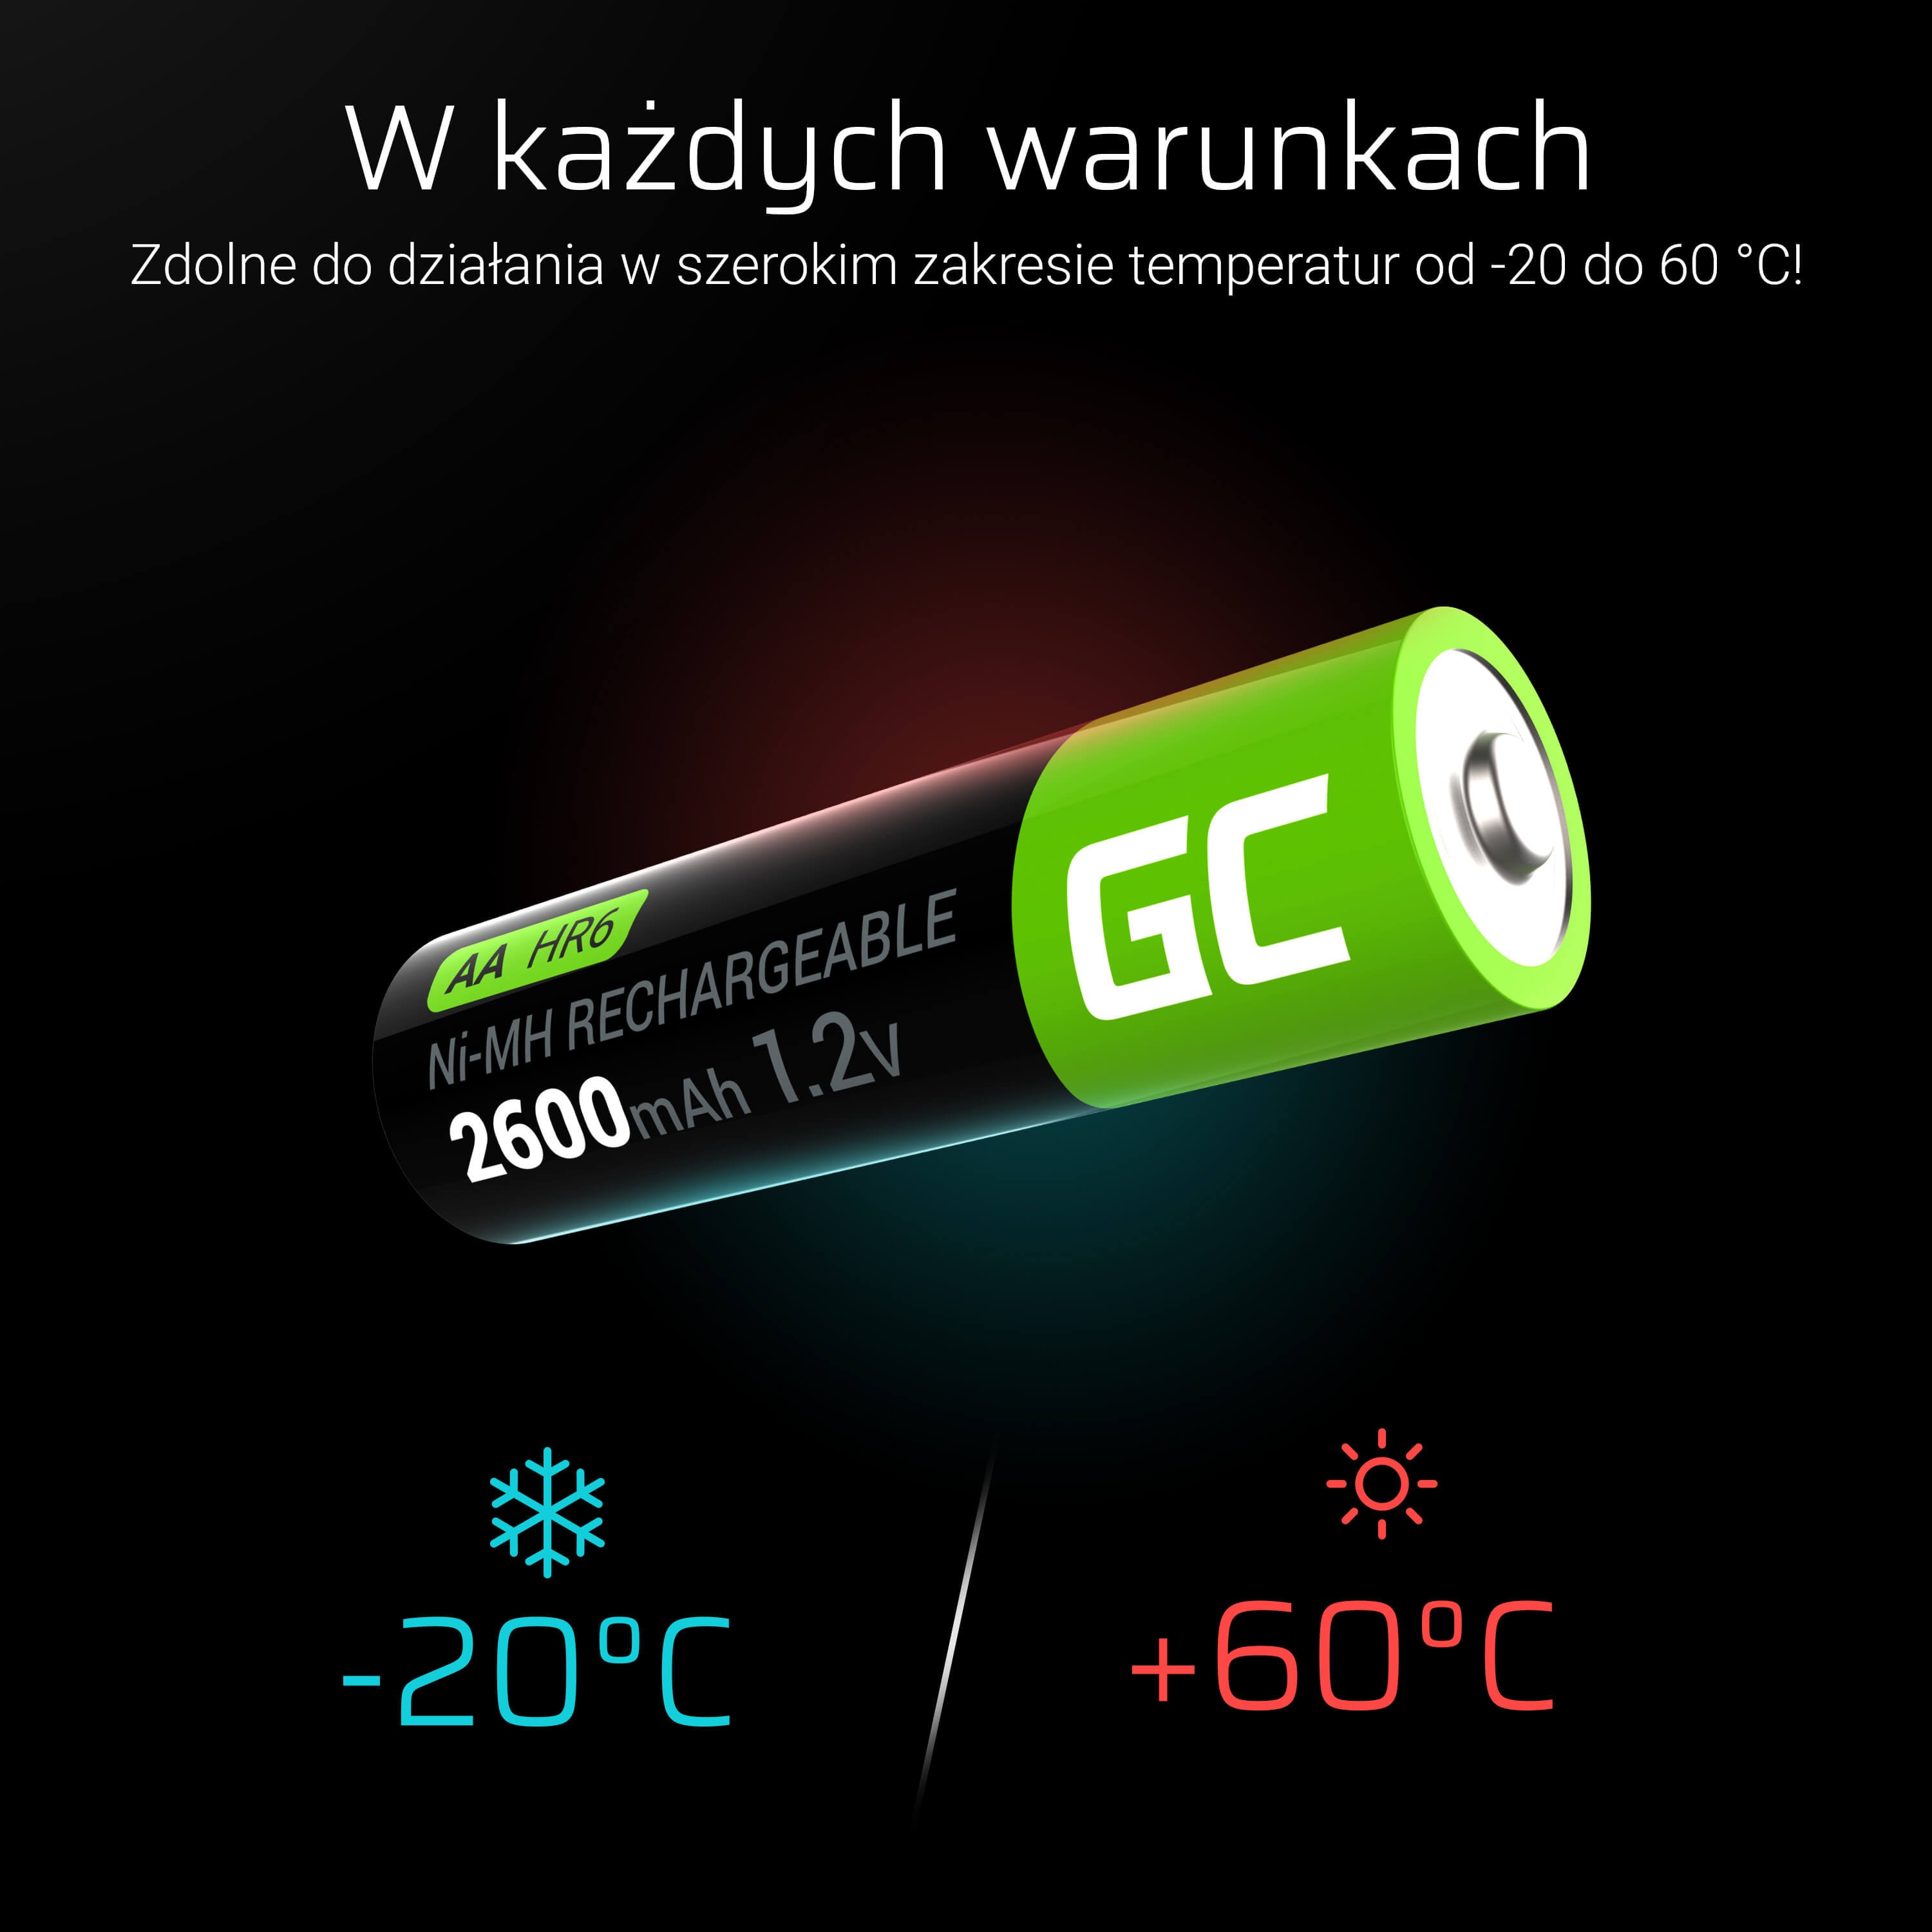 Green Cell batteries rechargeables Ni-MH 4x AA 2600 mAh R6